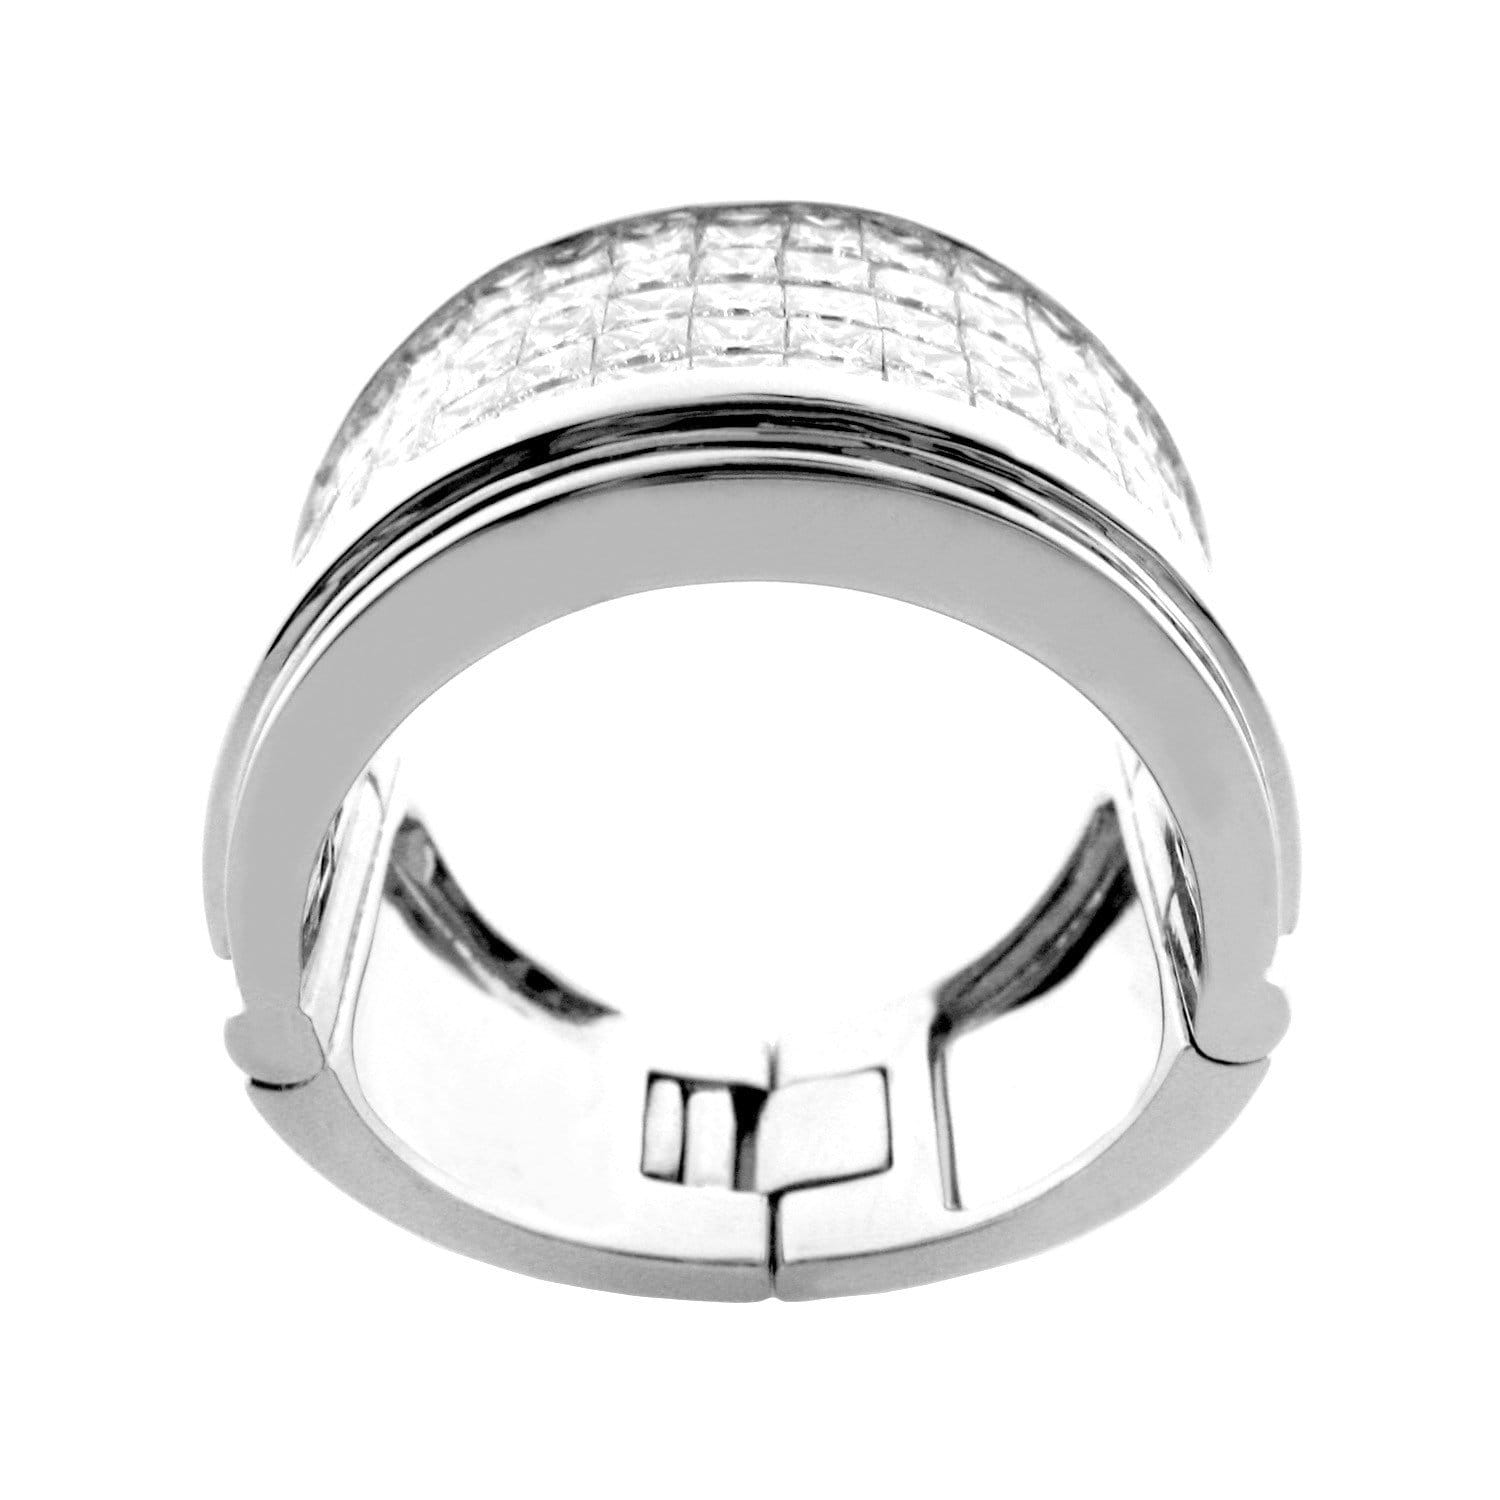 CHRIS AIRE DIAMOND RING - THE BLING TALE - Chris Aire Fine Jewelry & Timepieces